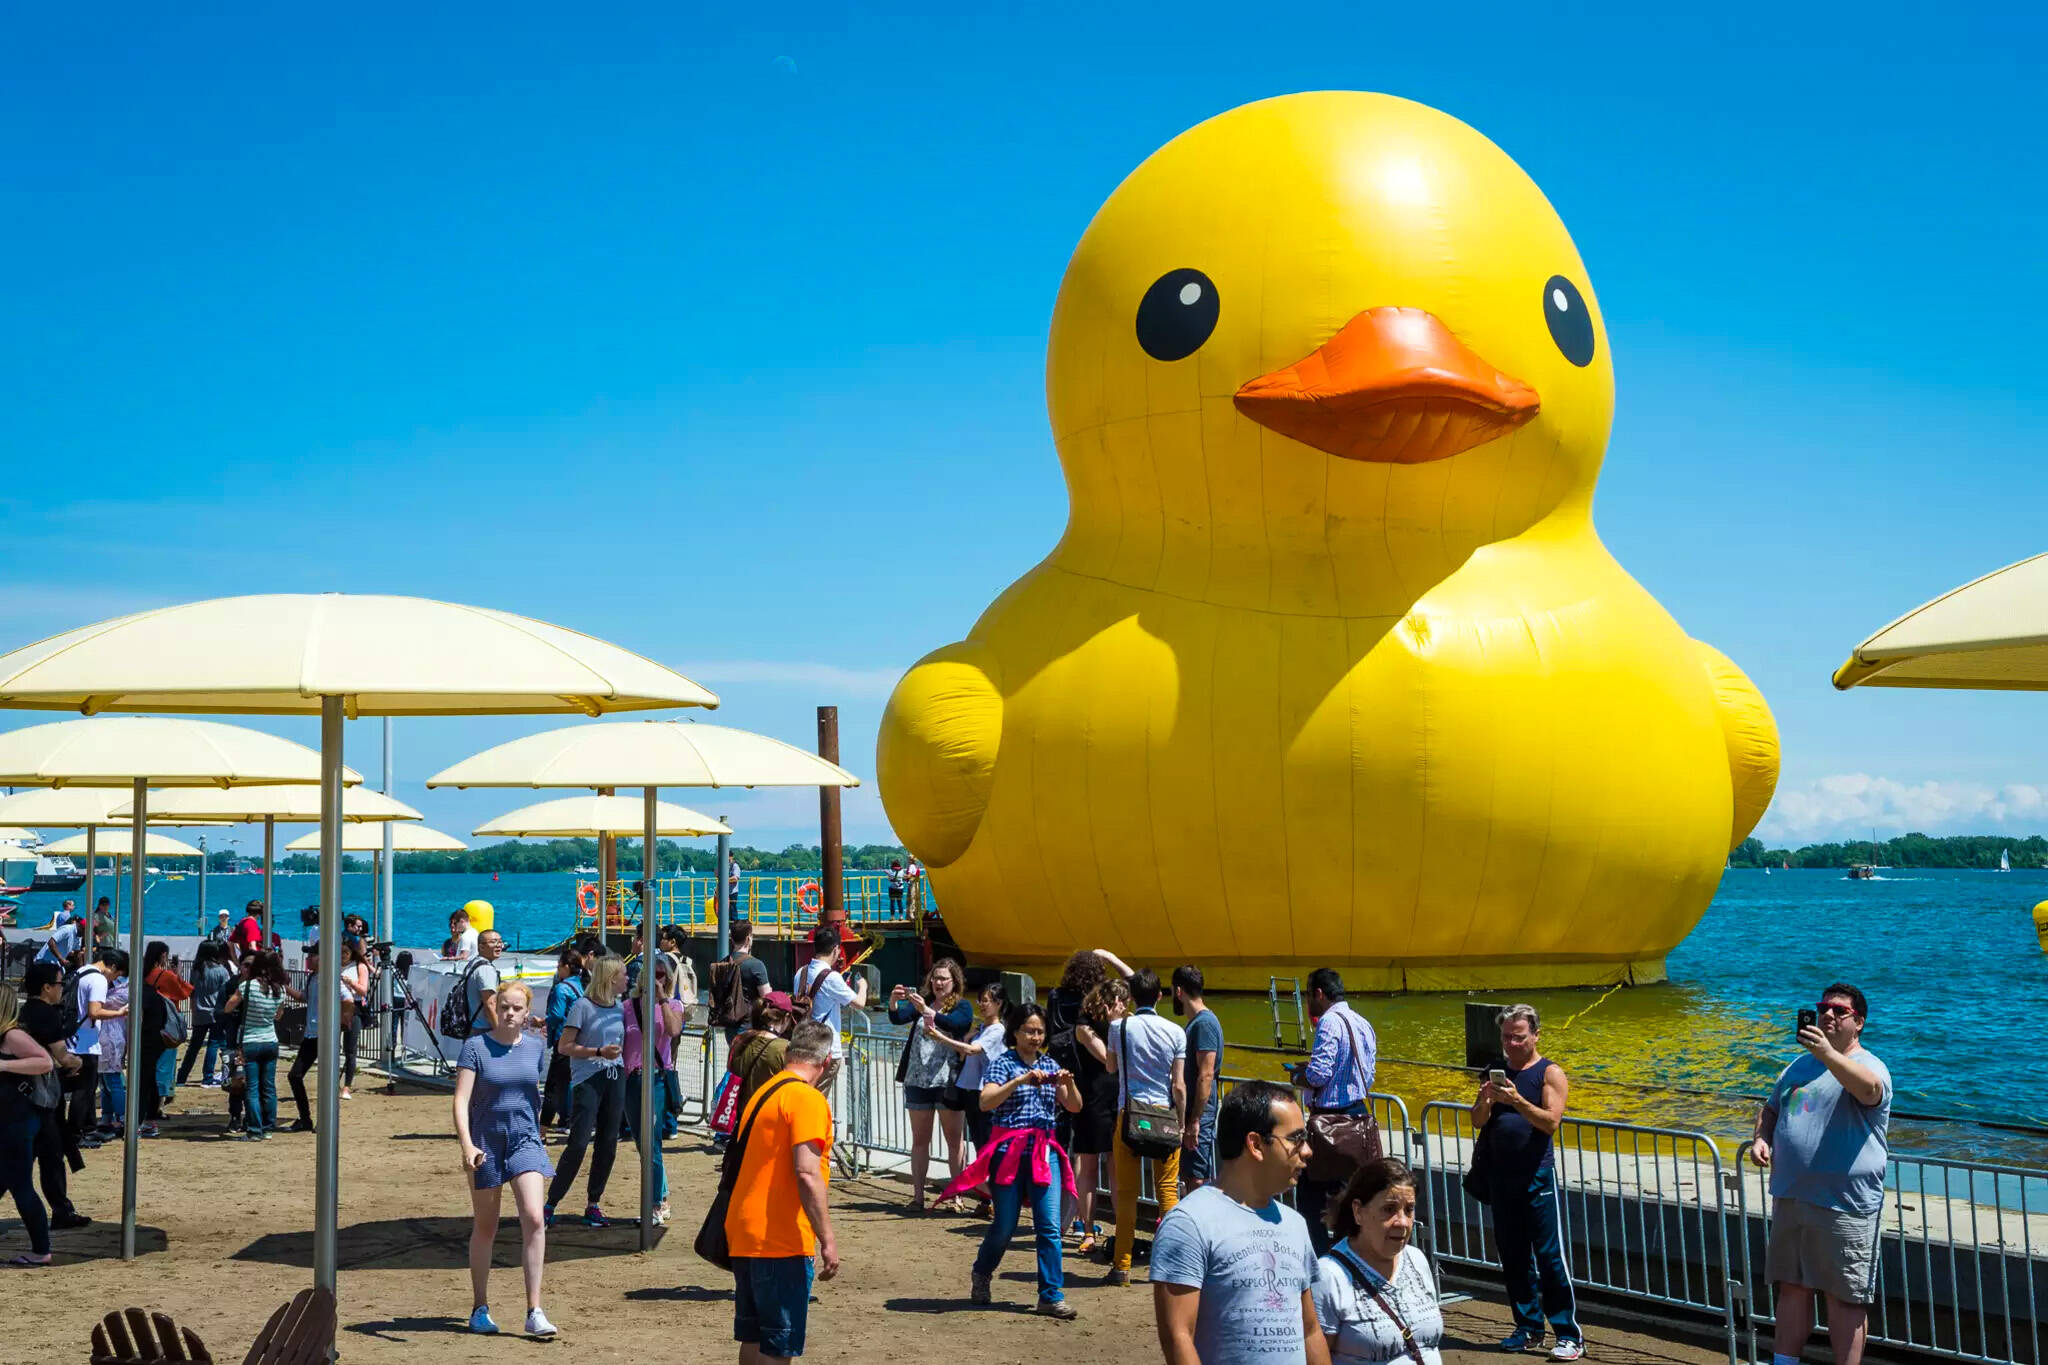 The world's largest rubber duck is coming back to Toronto